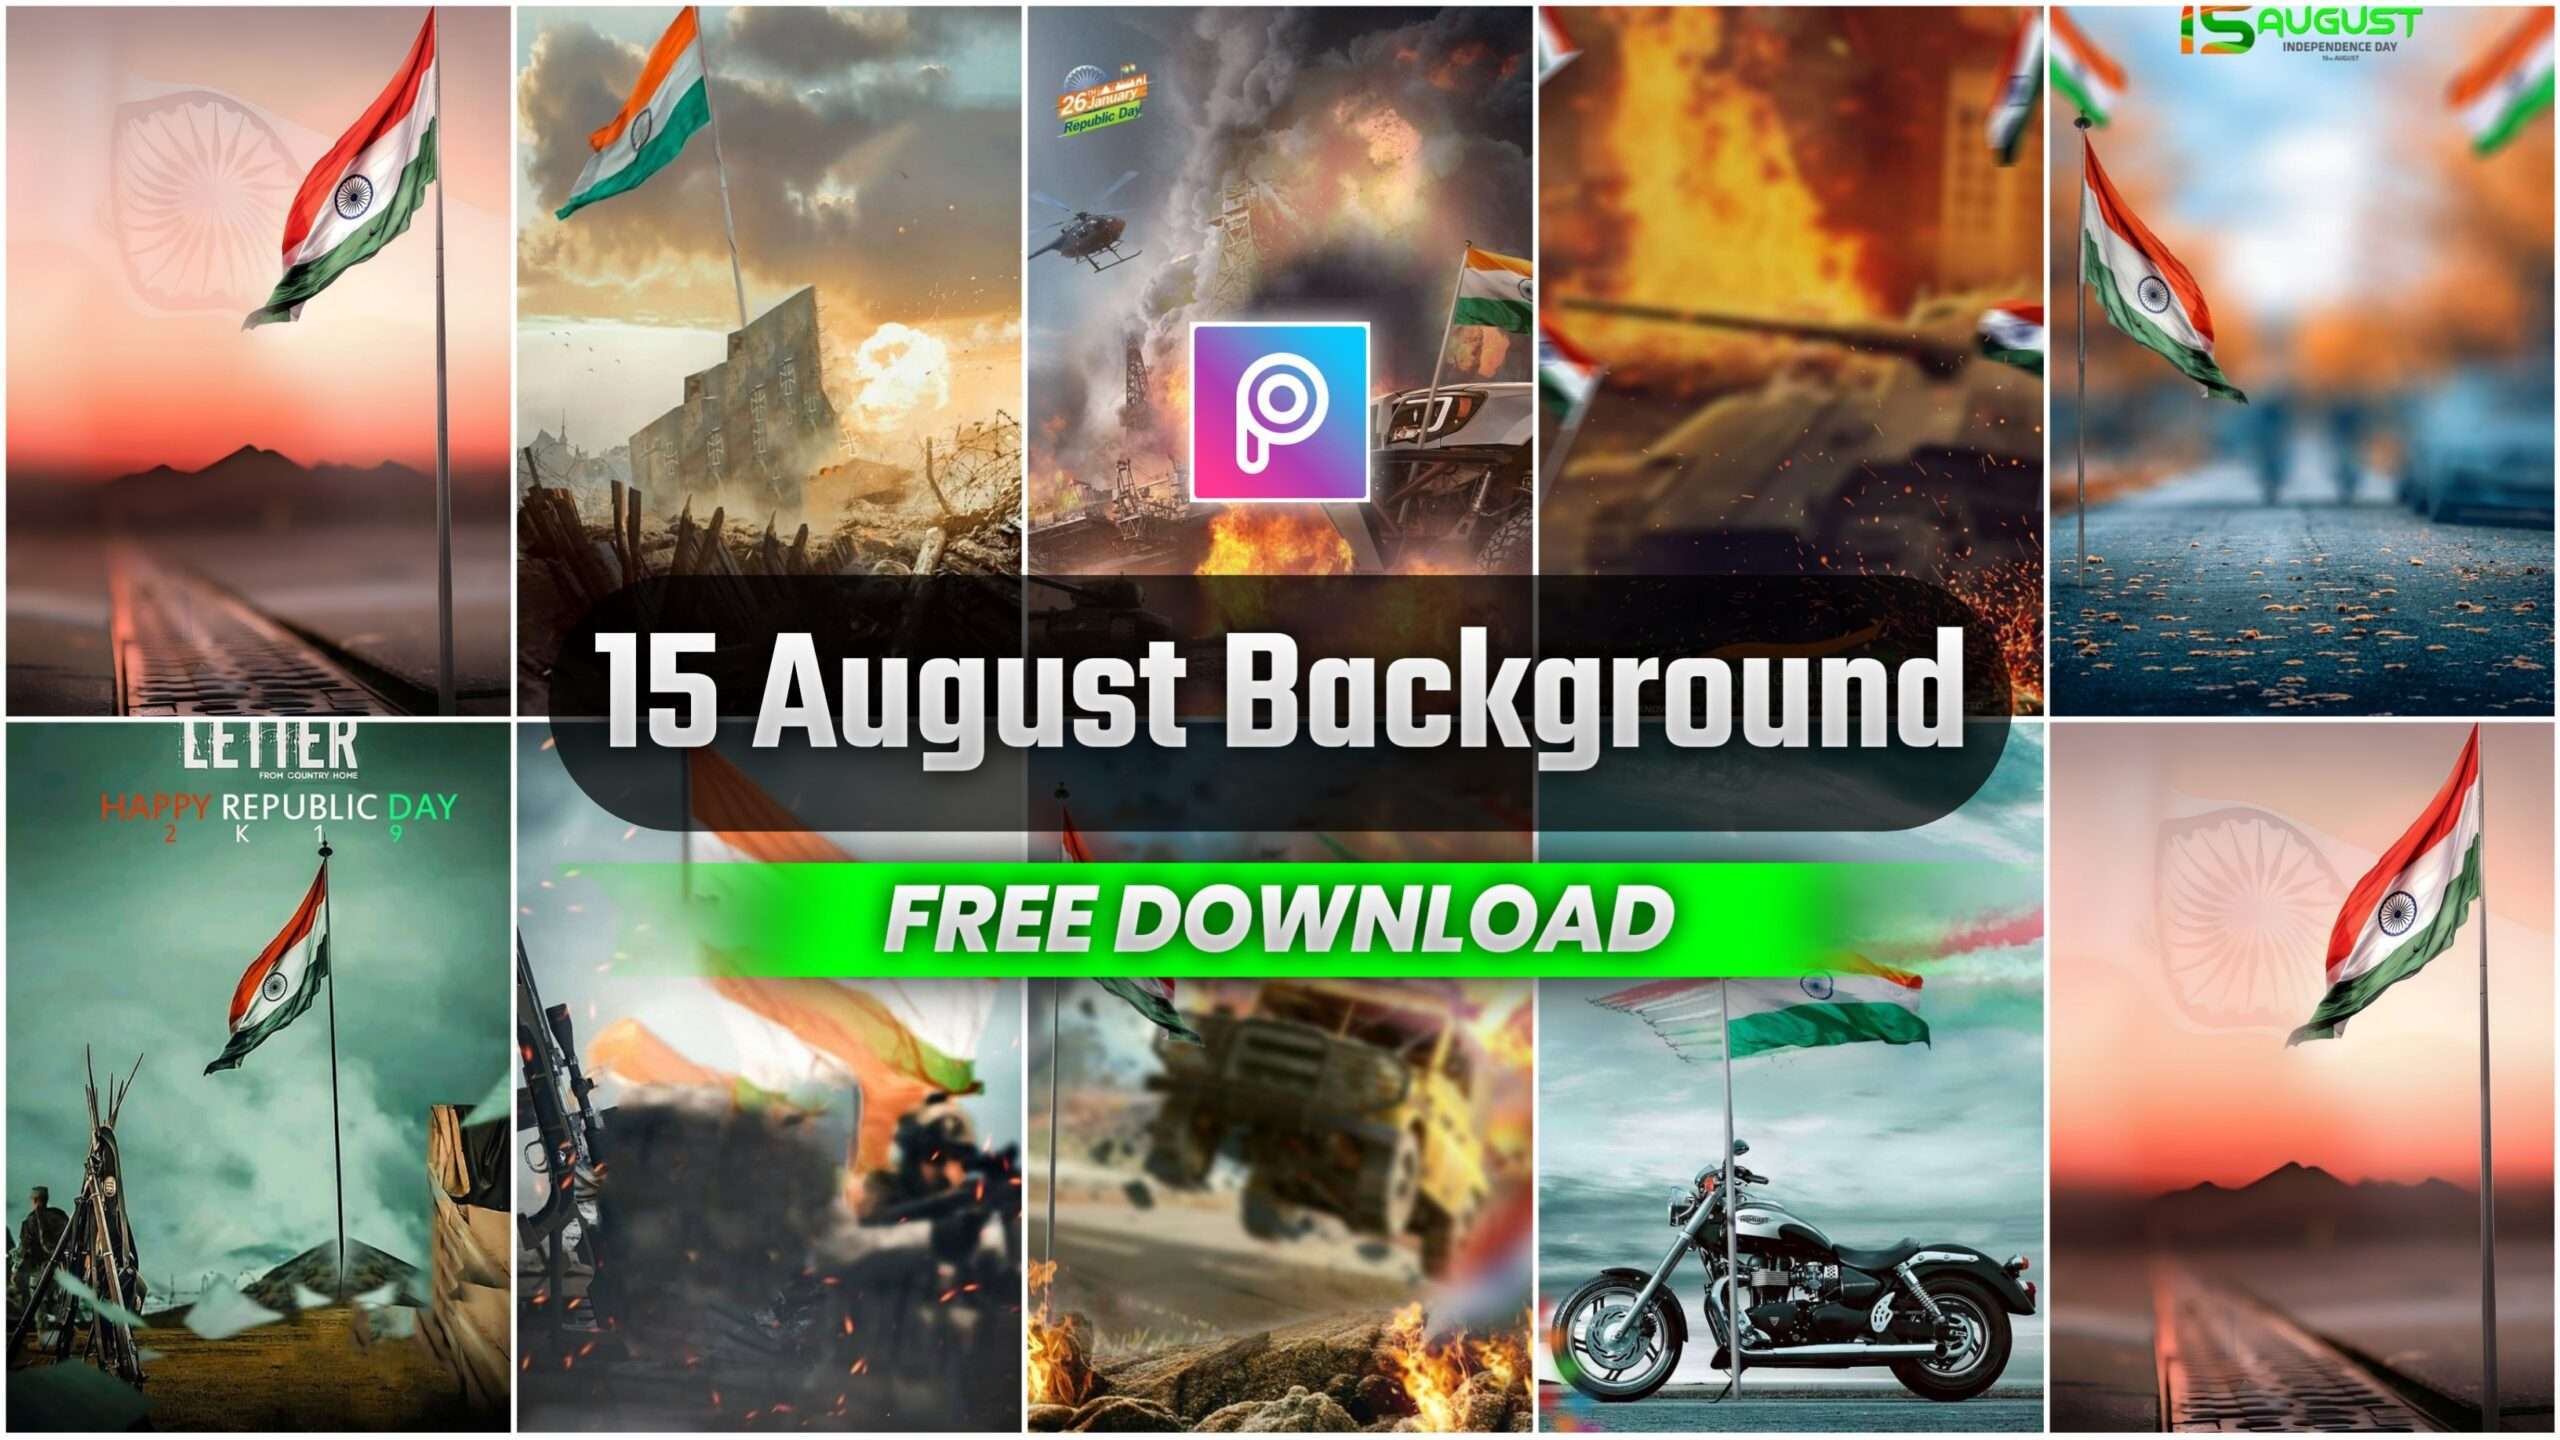 15 August (independence day) Photo Editing HD Background pack free Download for PicsArt, photoshop and Snapseed.